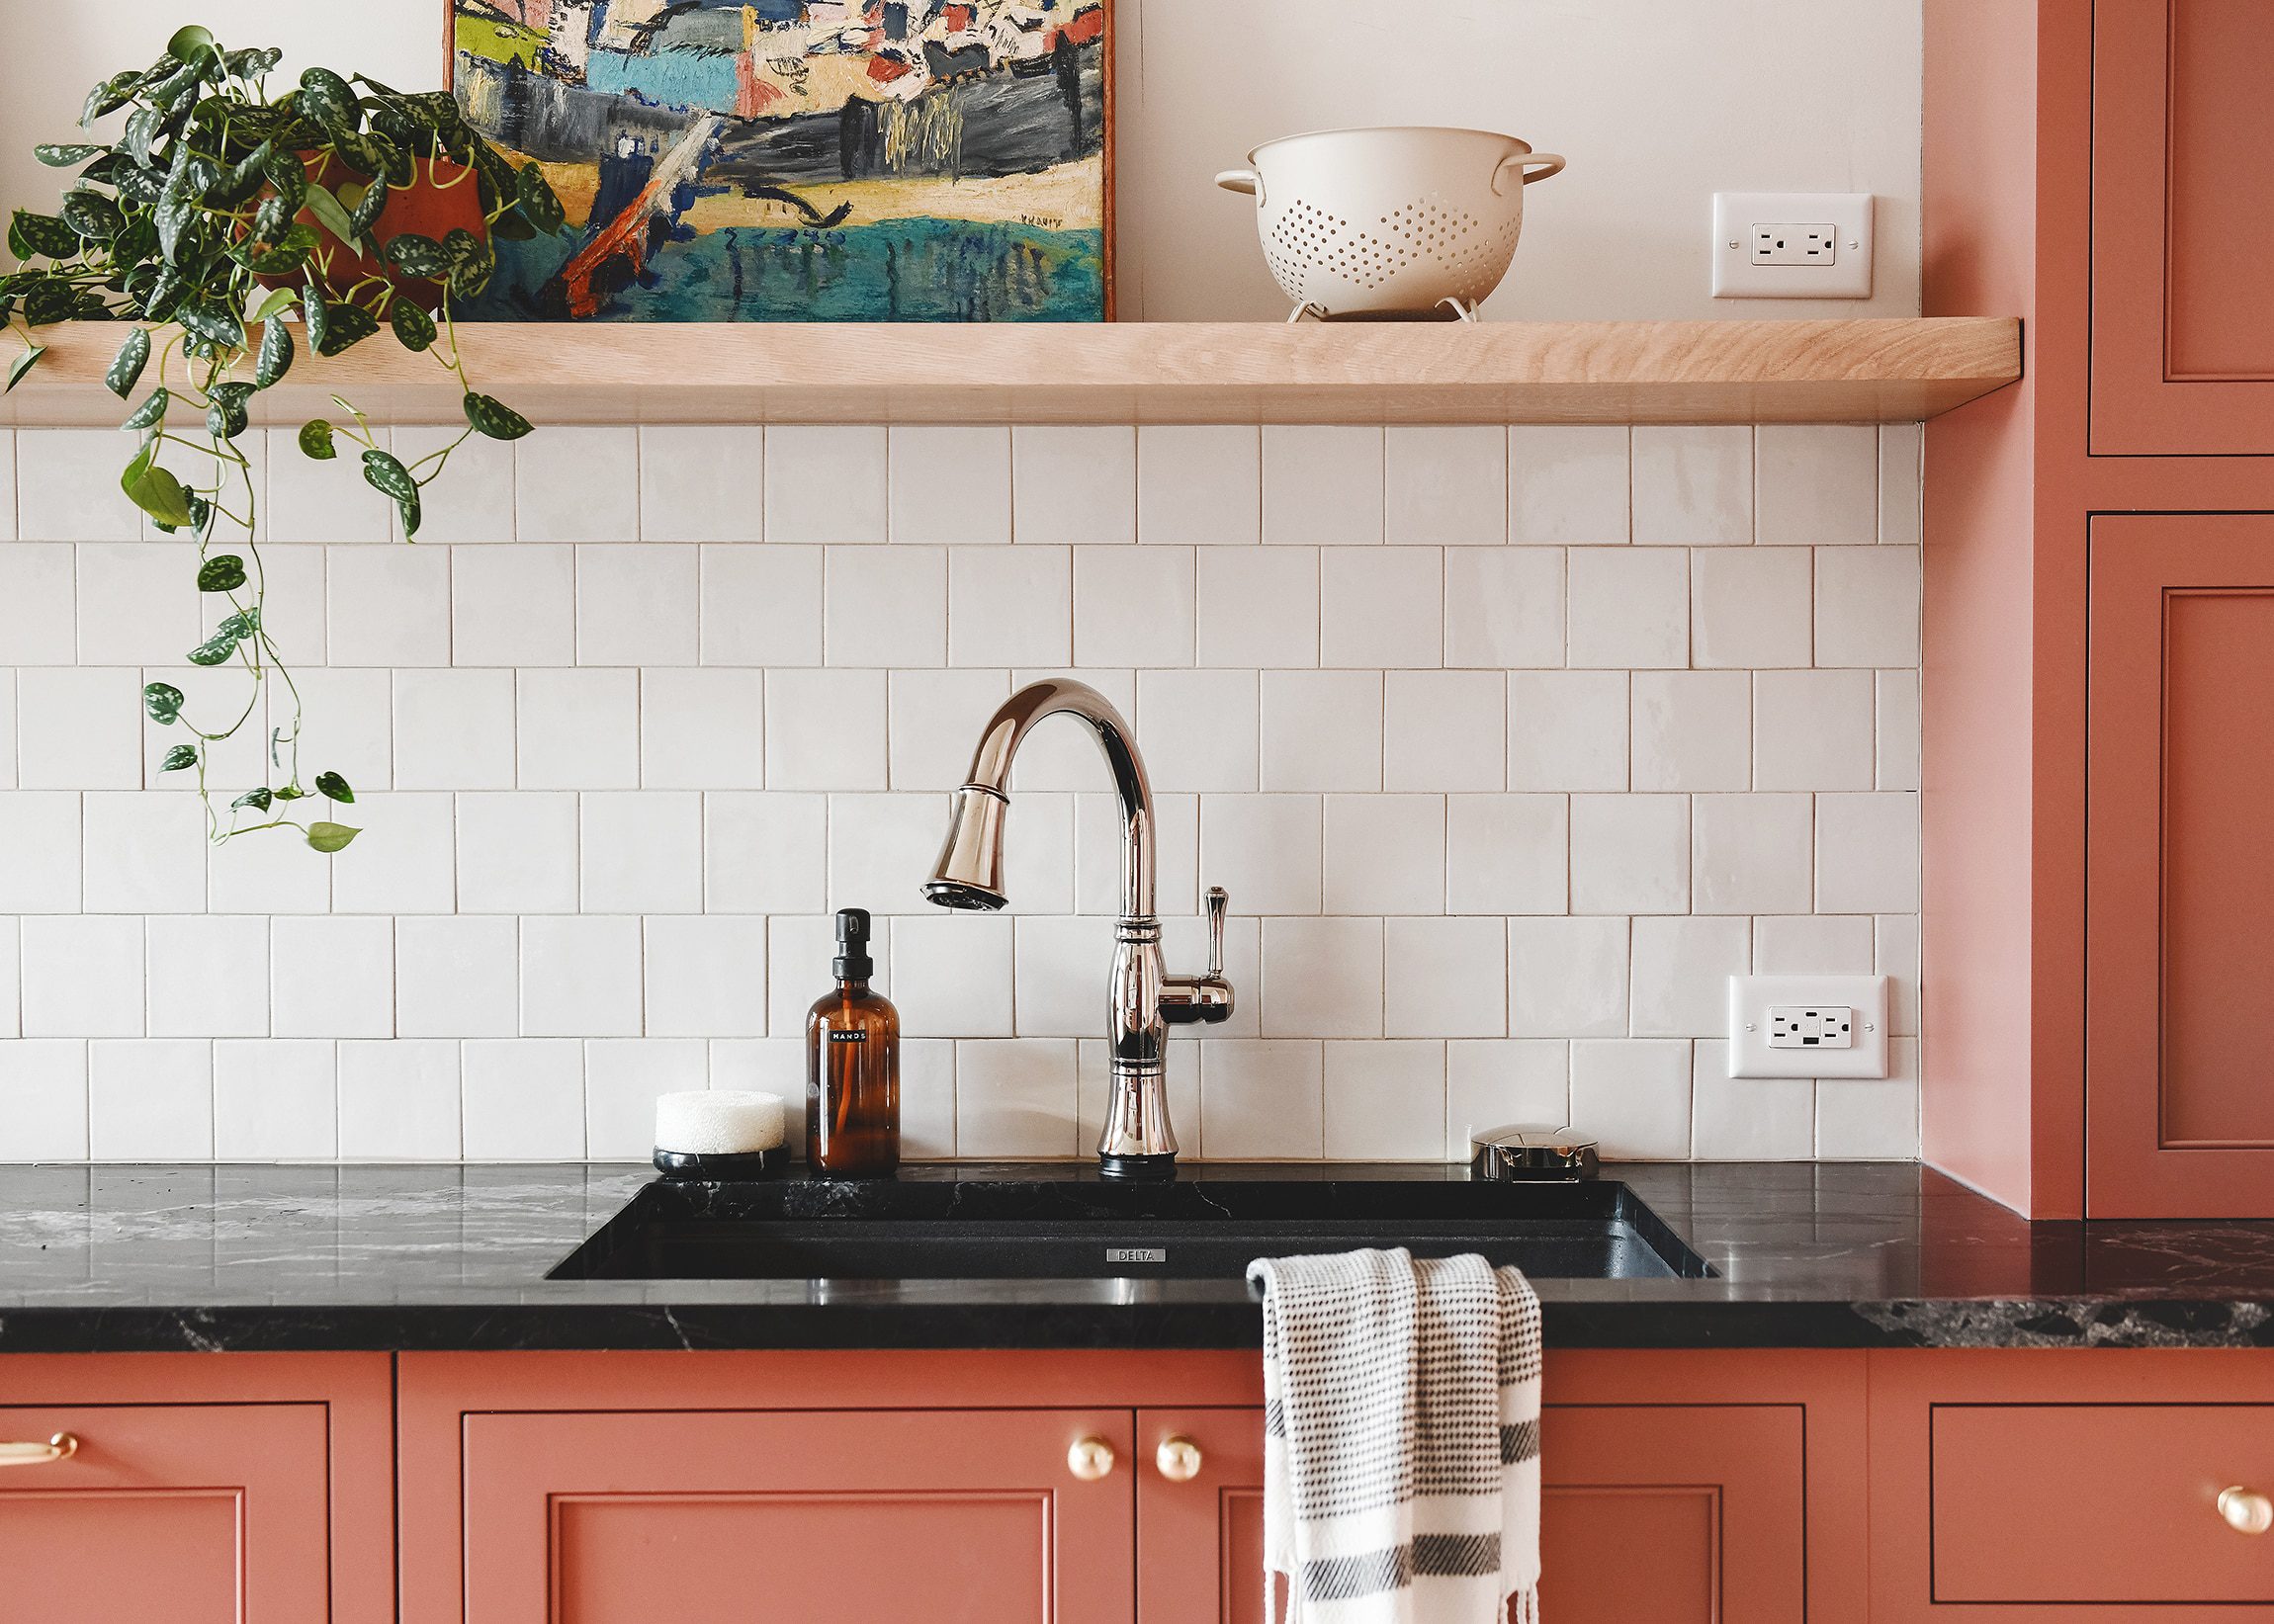 The Delta sink, faucet and glass rinser installed in our new kitchen // via Yellow Brick Home